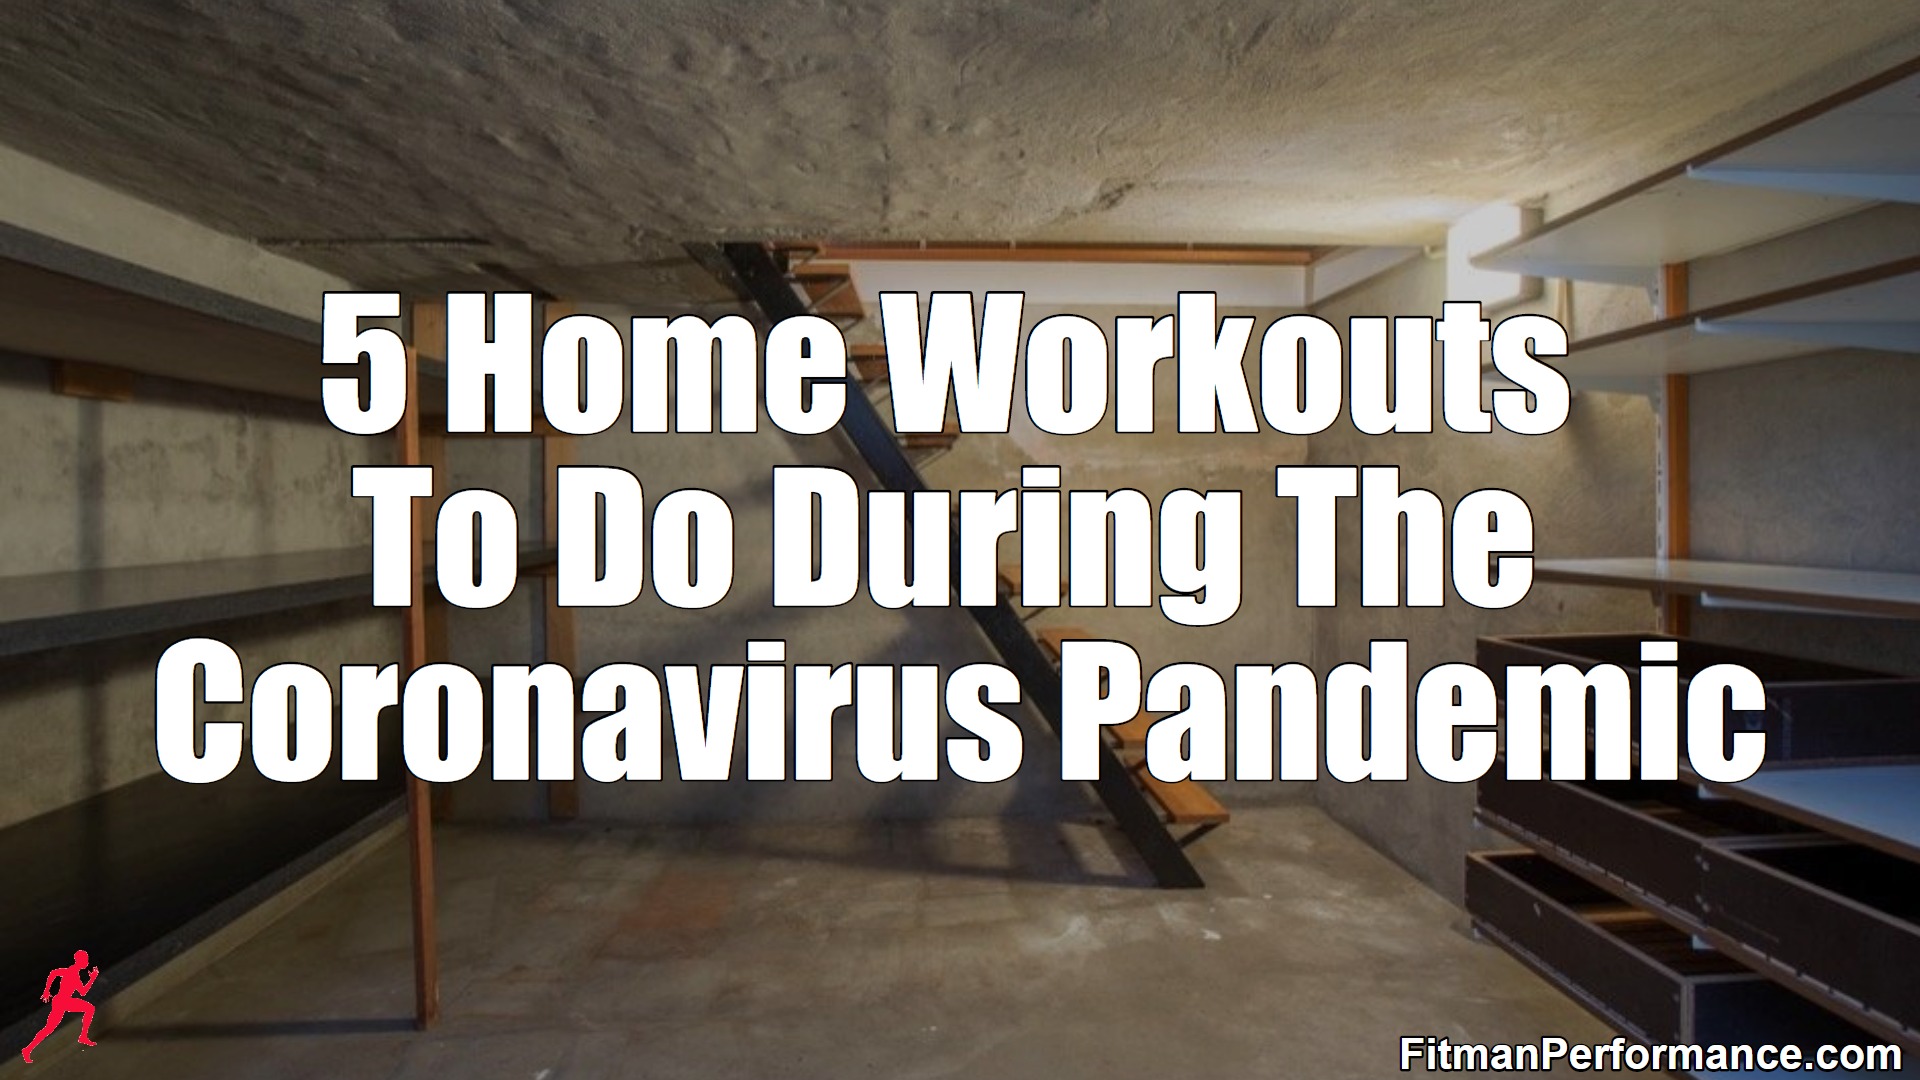 5 home workouts to do during the covid-19 pandemic